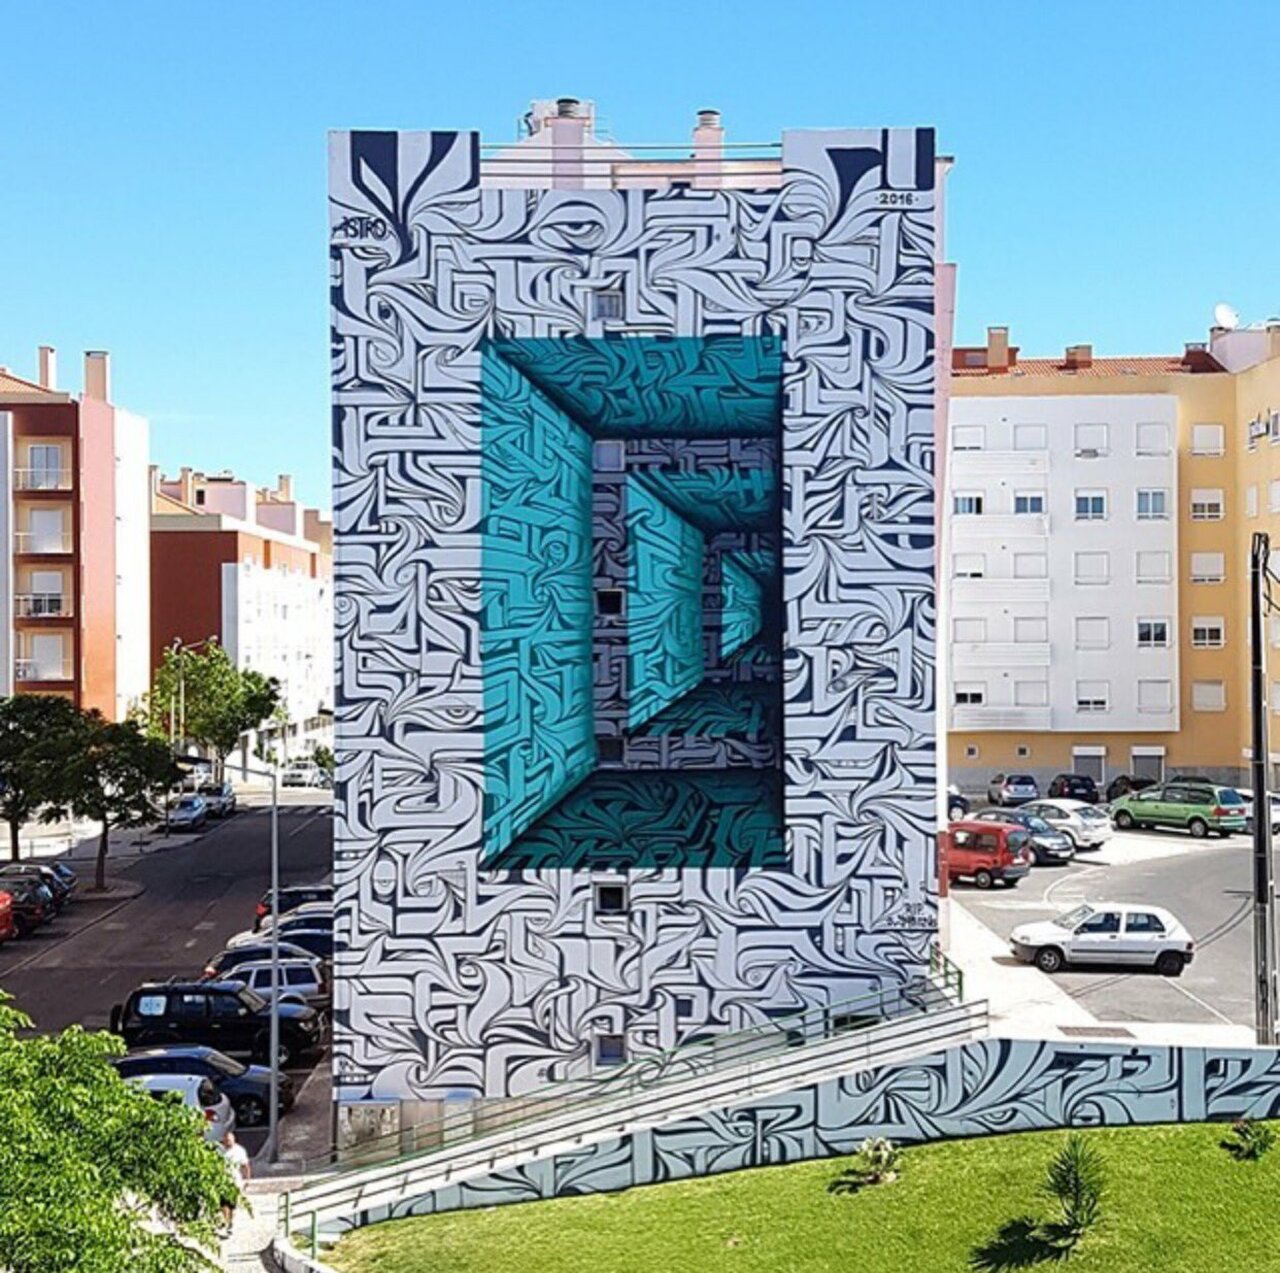 Optical illusion mural by Astro in Lisbon   #streetart #OTHERness https://t.co/JzVm3MIEO8